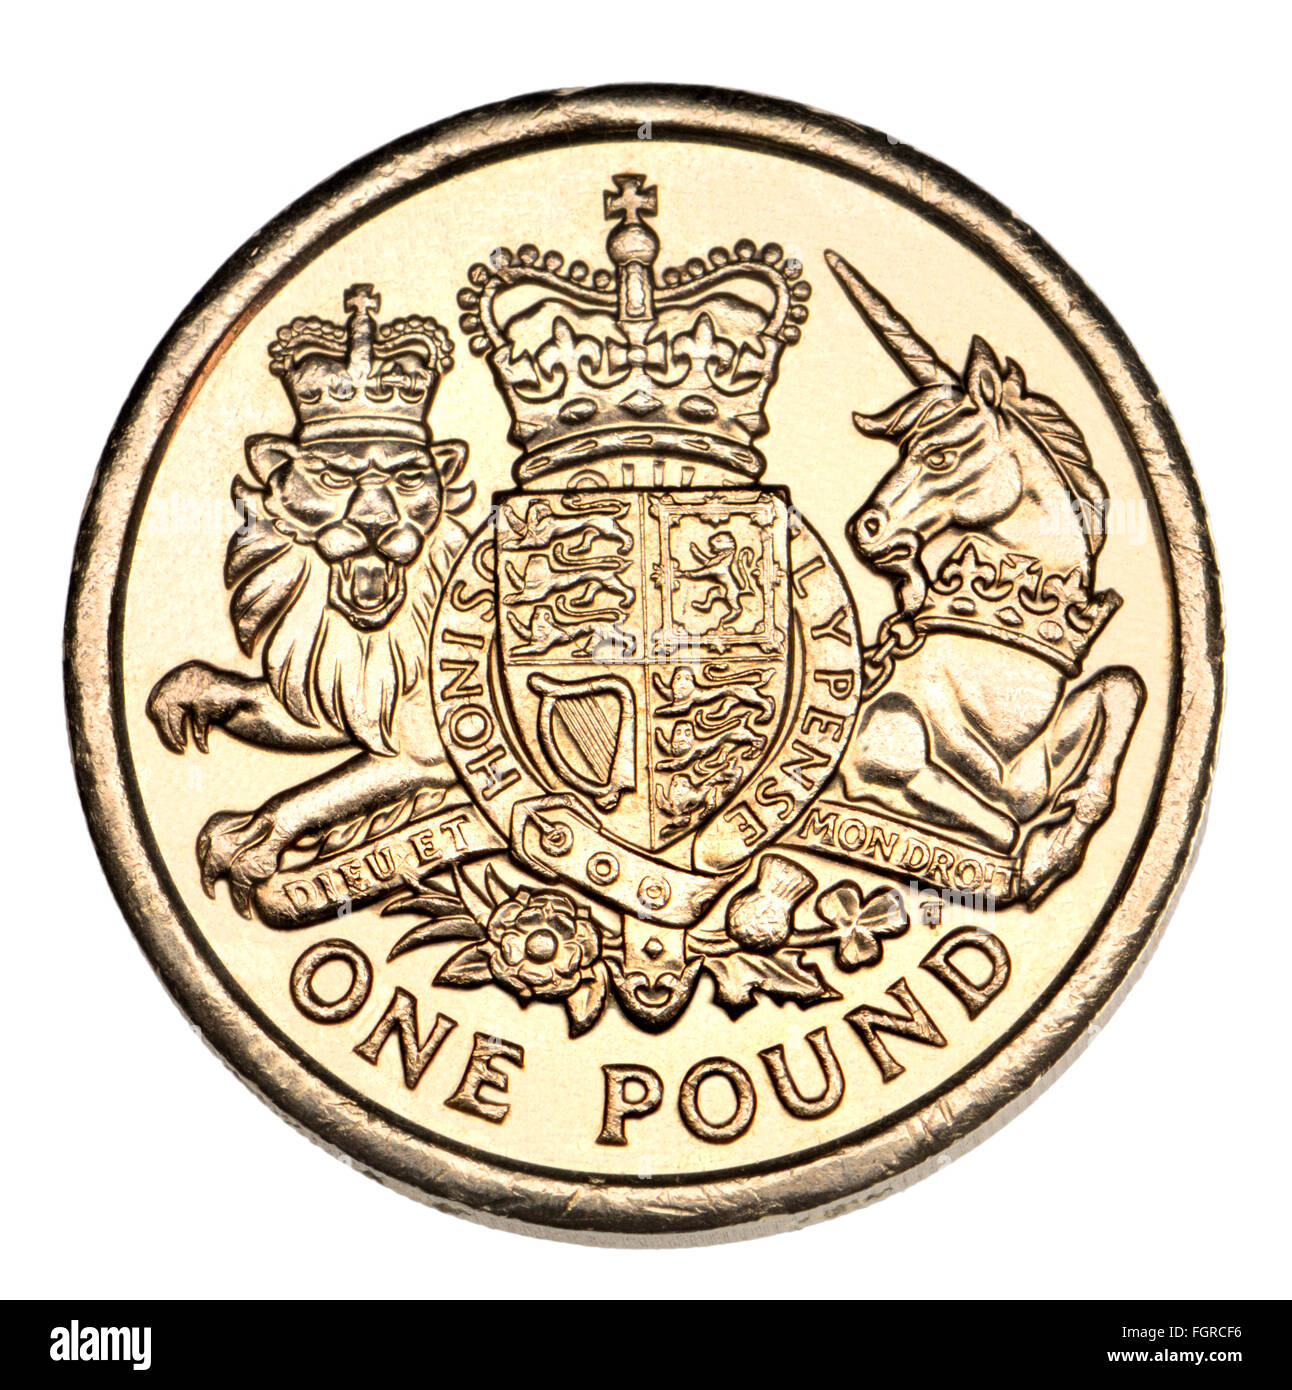 Reverse of 2015 British £1 pound coin showing the Royal Coat of Arms of the United Kingdom with Lion and Unicorn Stock Photo